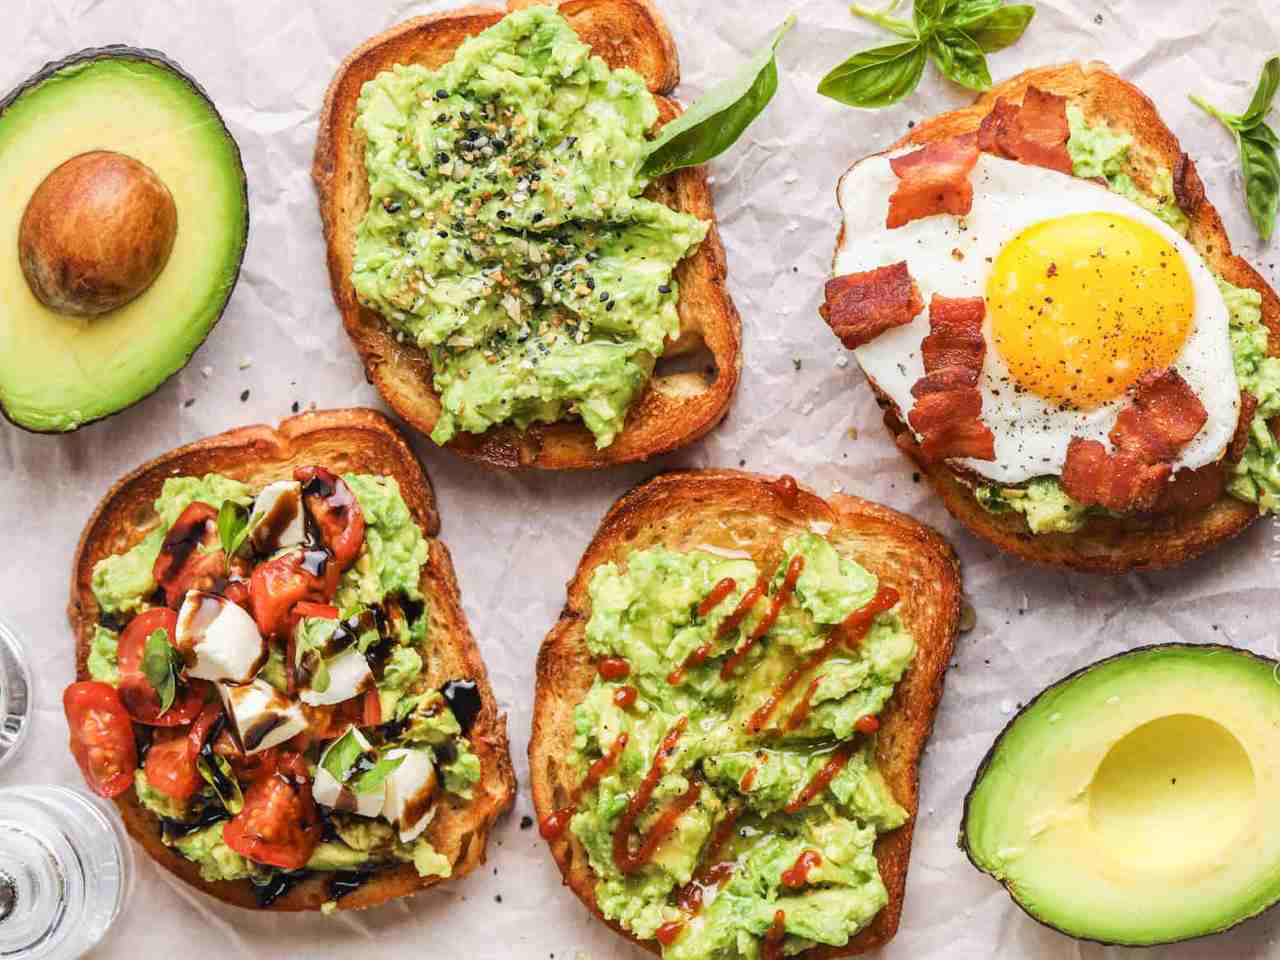 Avocado: Health Benefits & Ways to Include in Your Diet | Hello Fitness Magazine